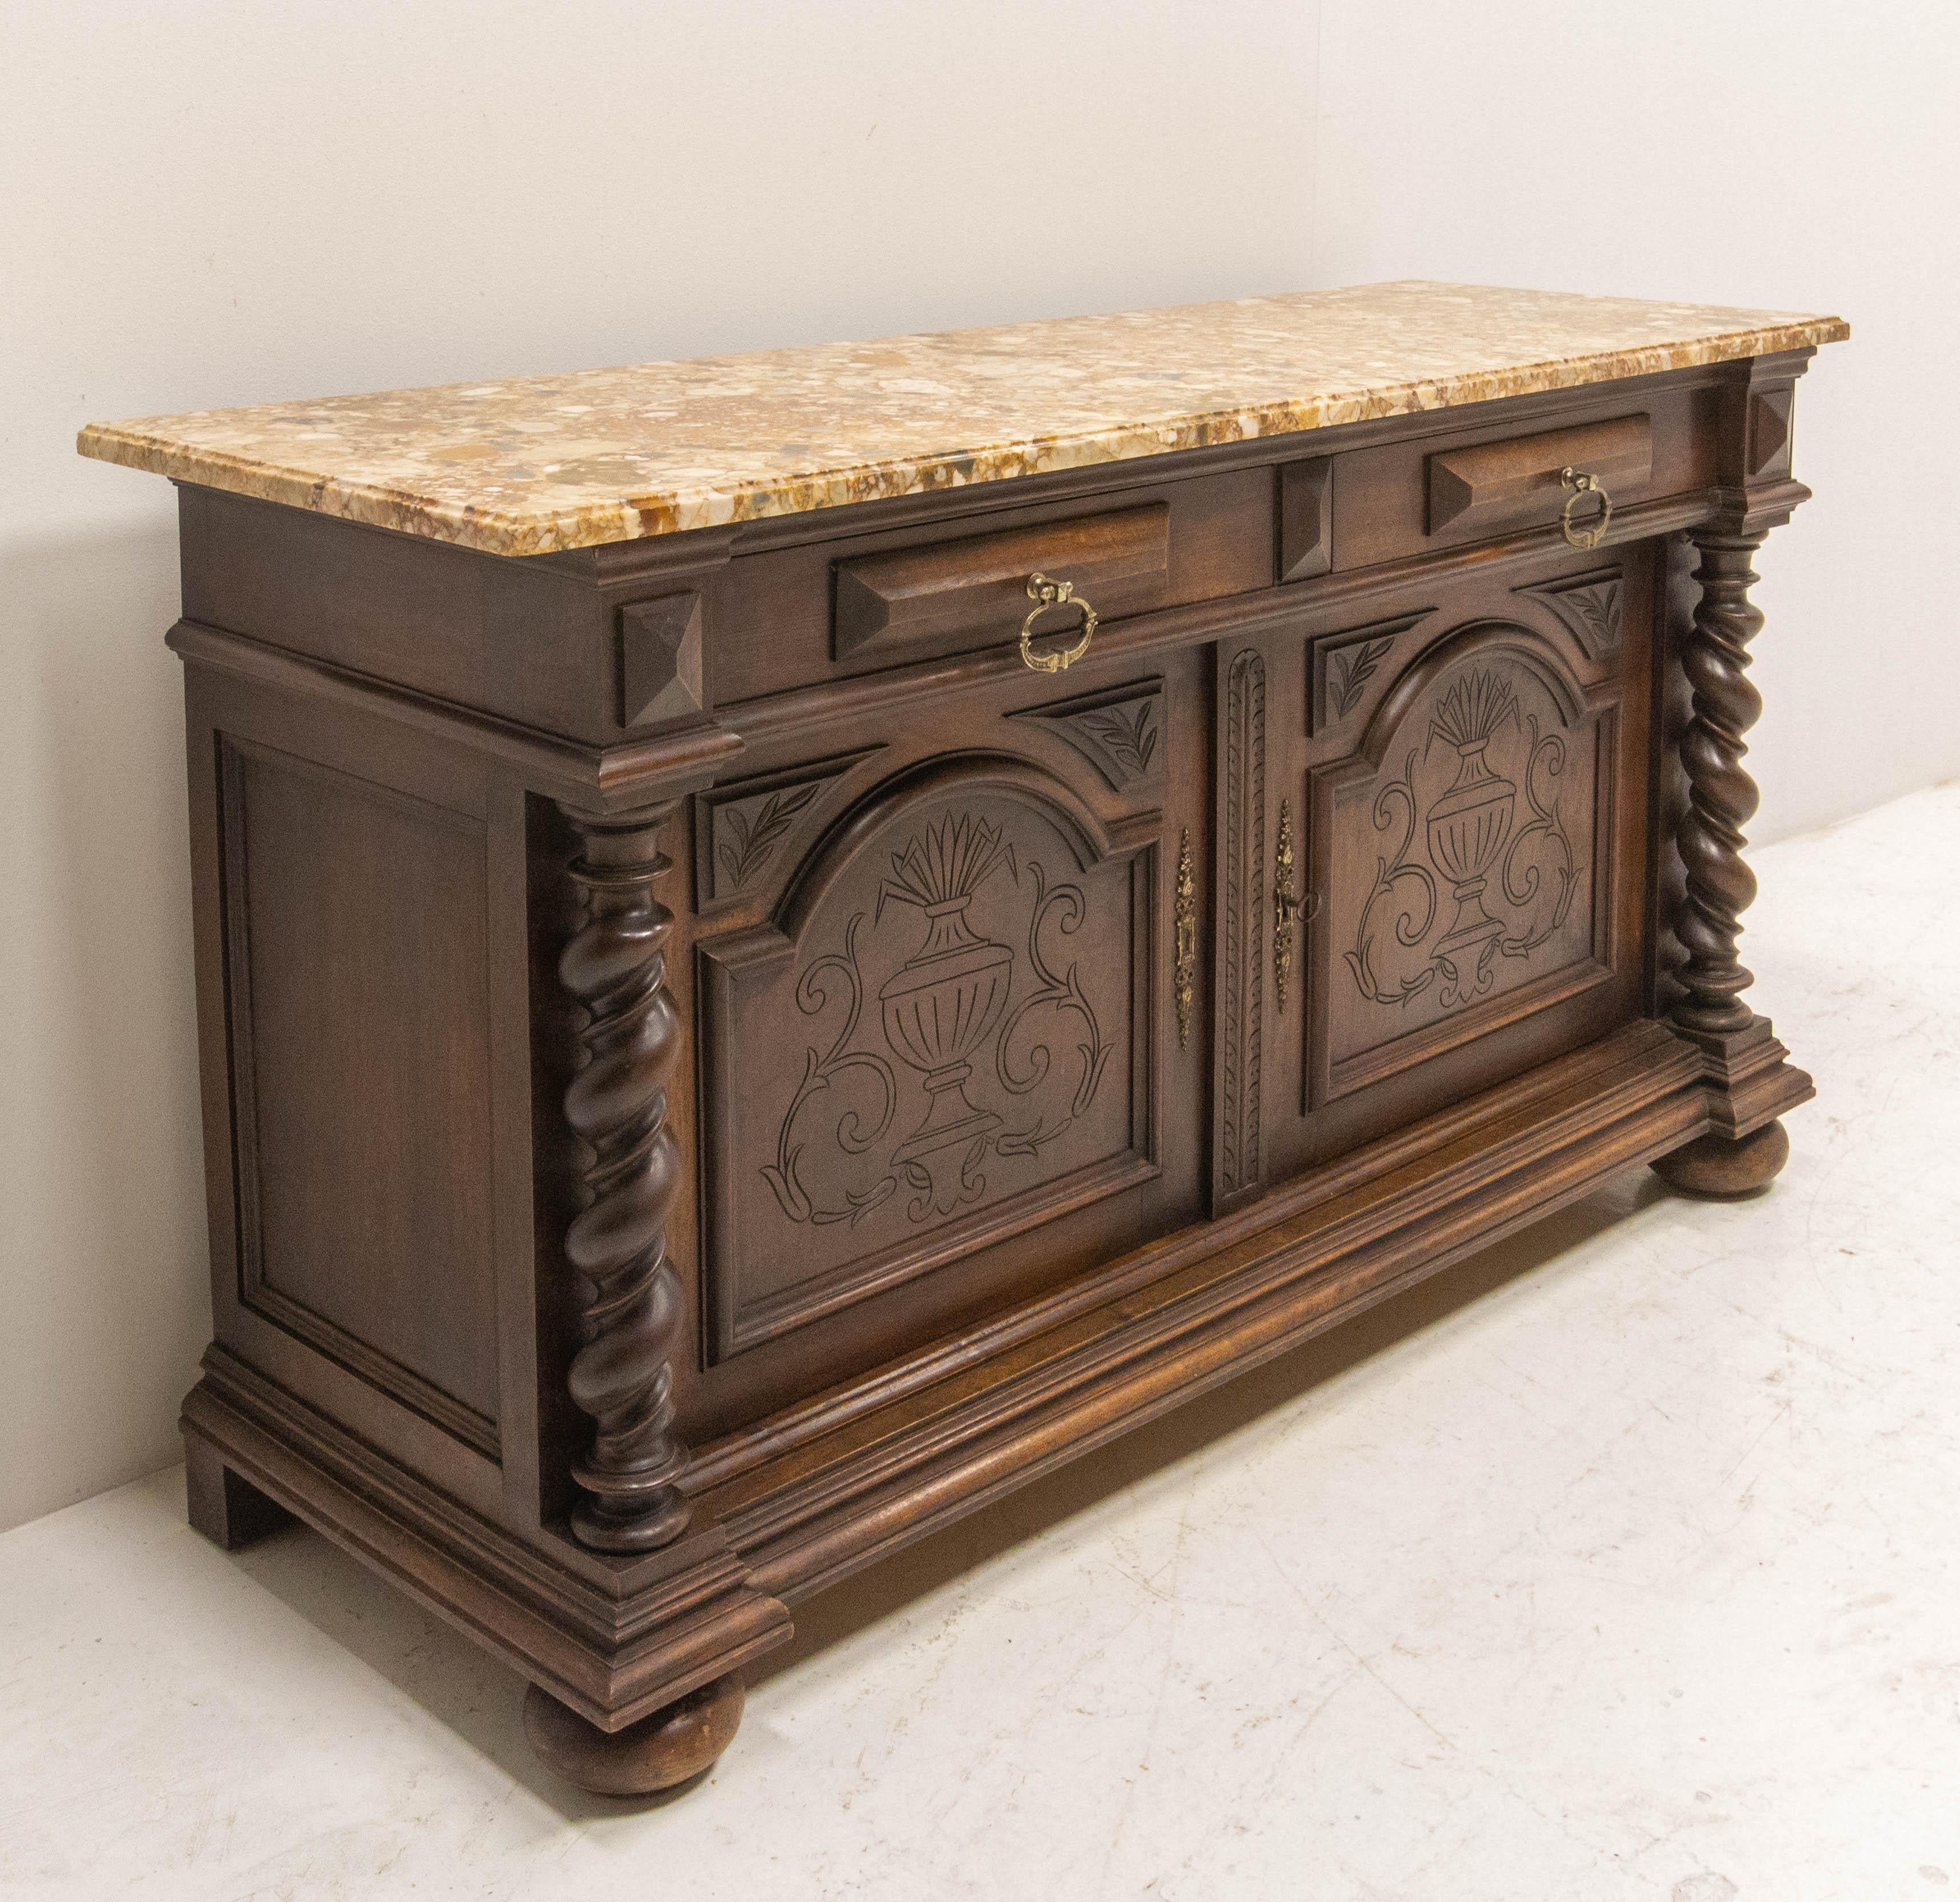 Late 19th century sideboard French credenza buffet
Louis XIII style turned columns and marble top. The marble top is not the original.
In very good condition 

Shipping:
P 46/134/H 74.5 cm 77 kg.